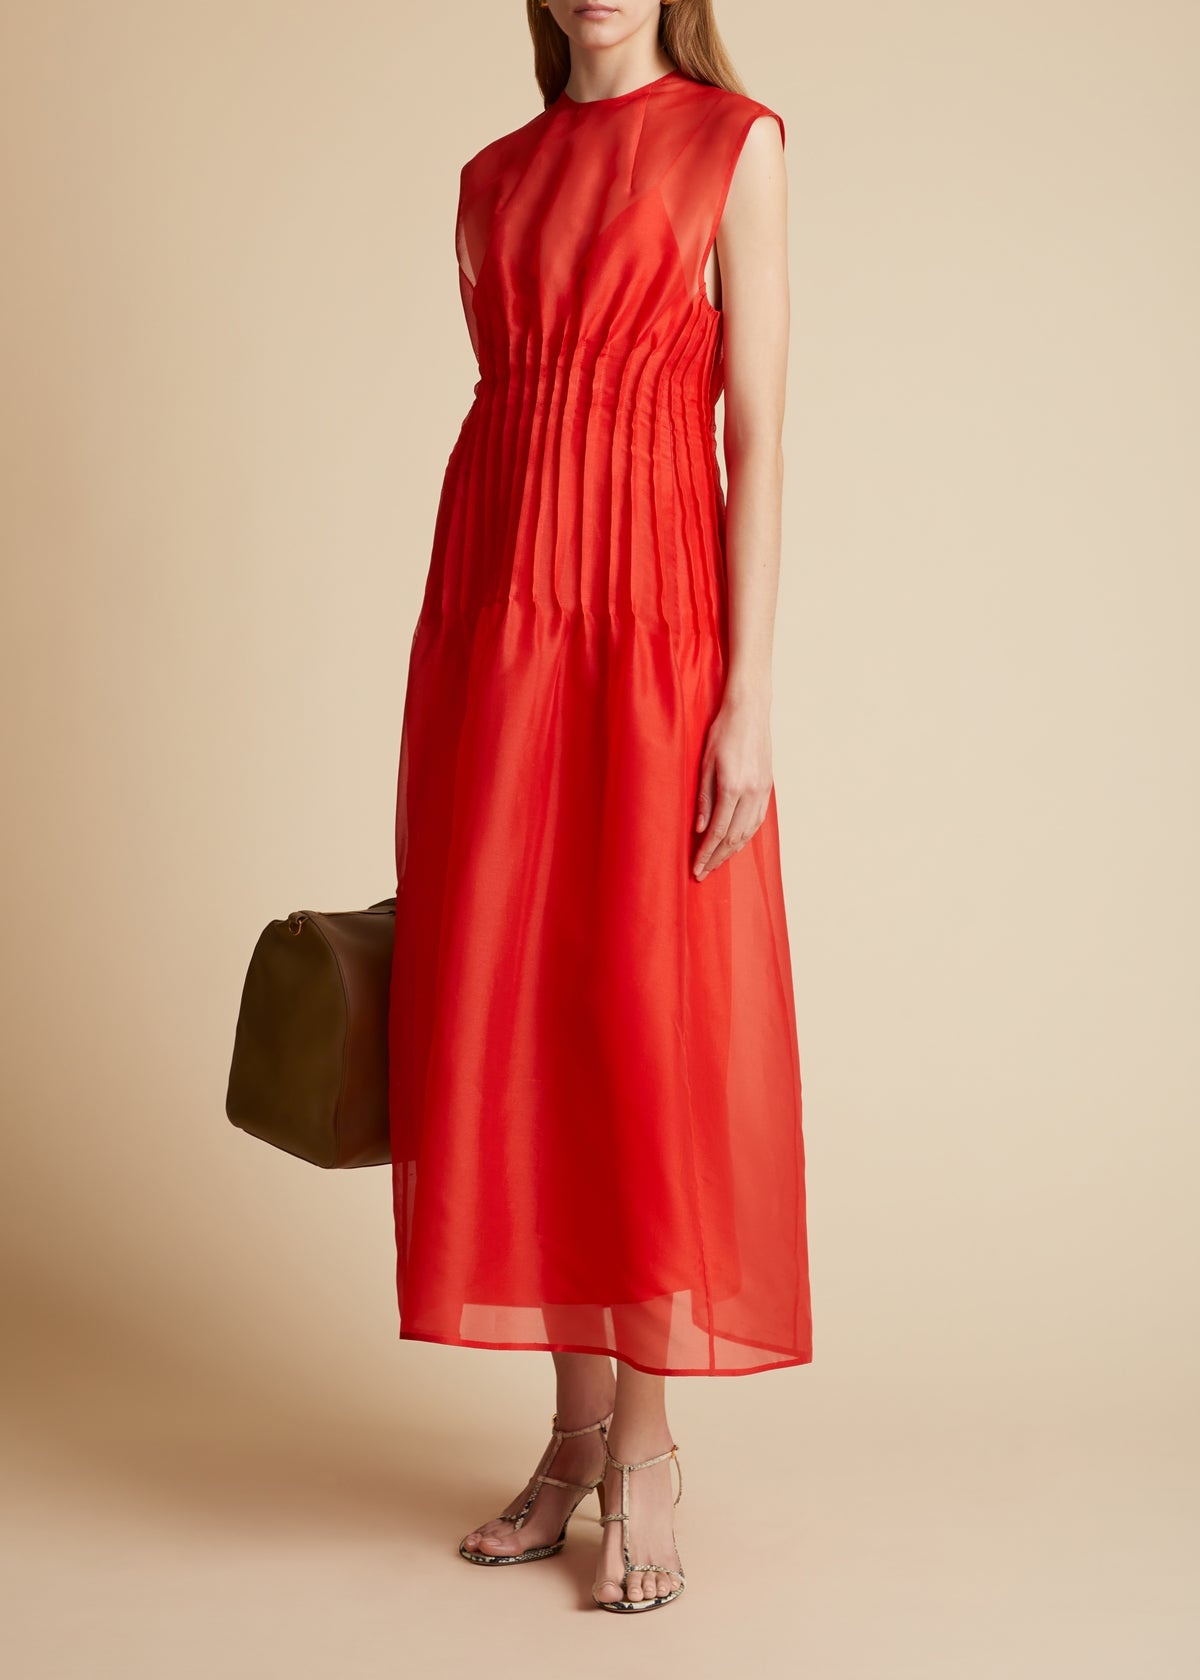 The Wes Dress in Fire Red - 1